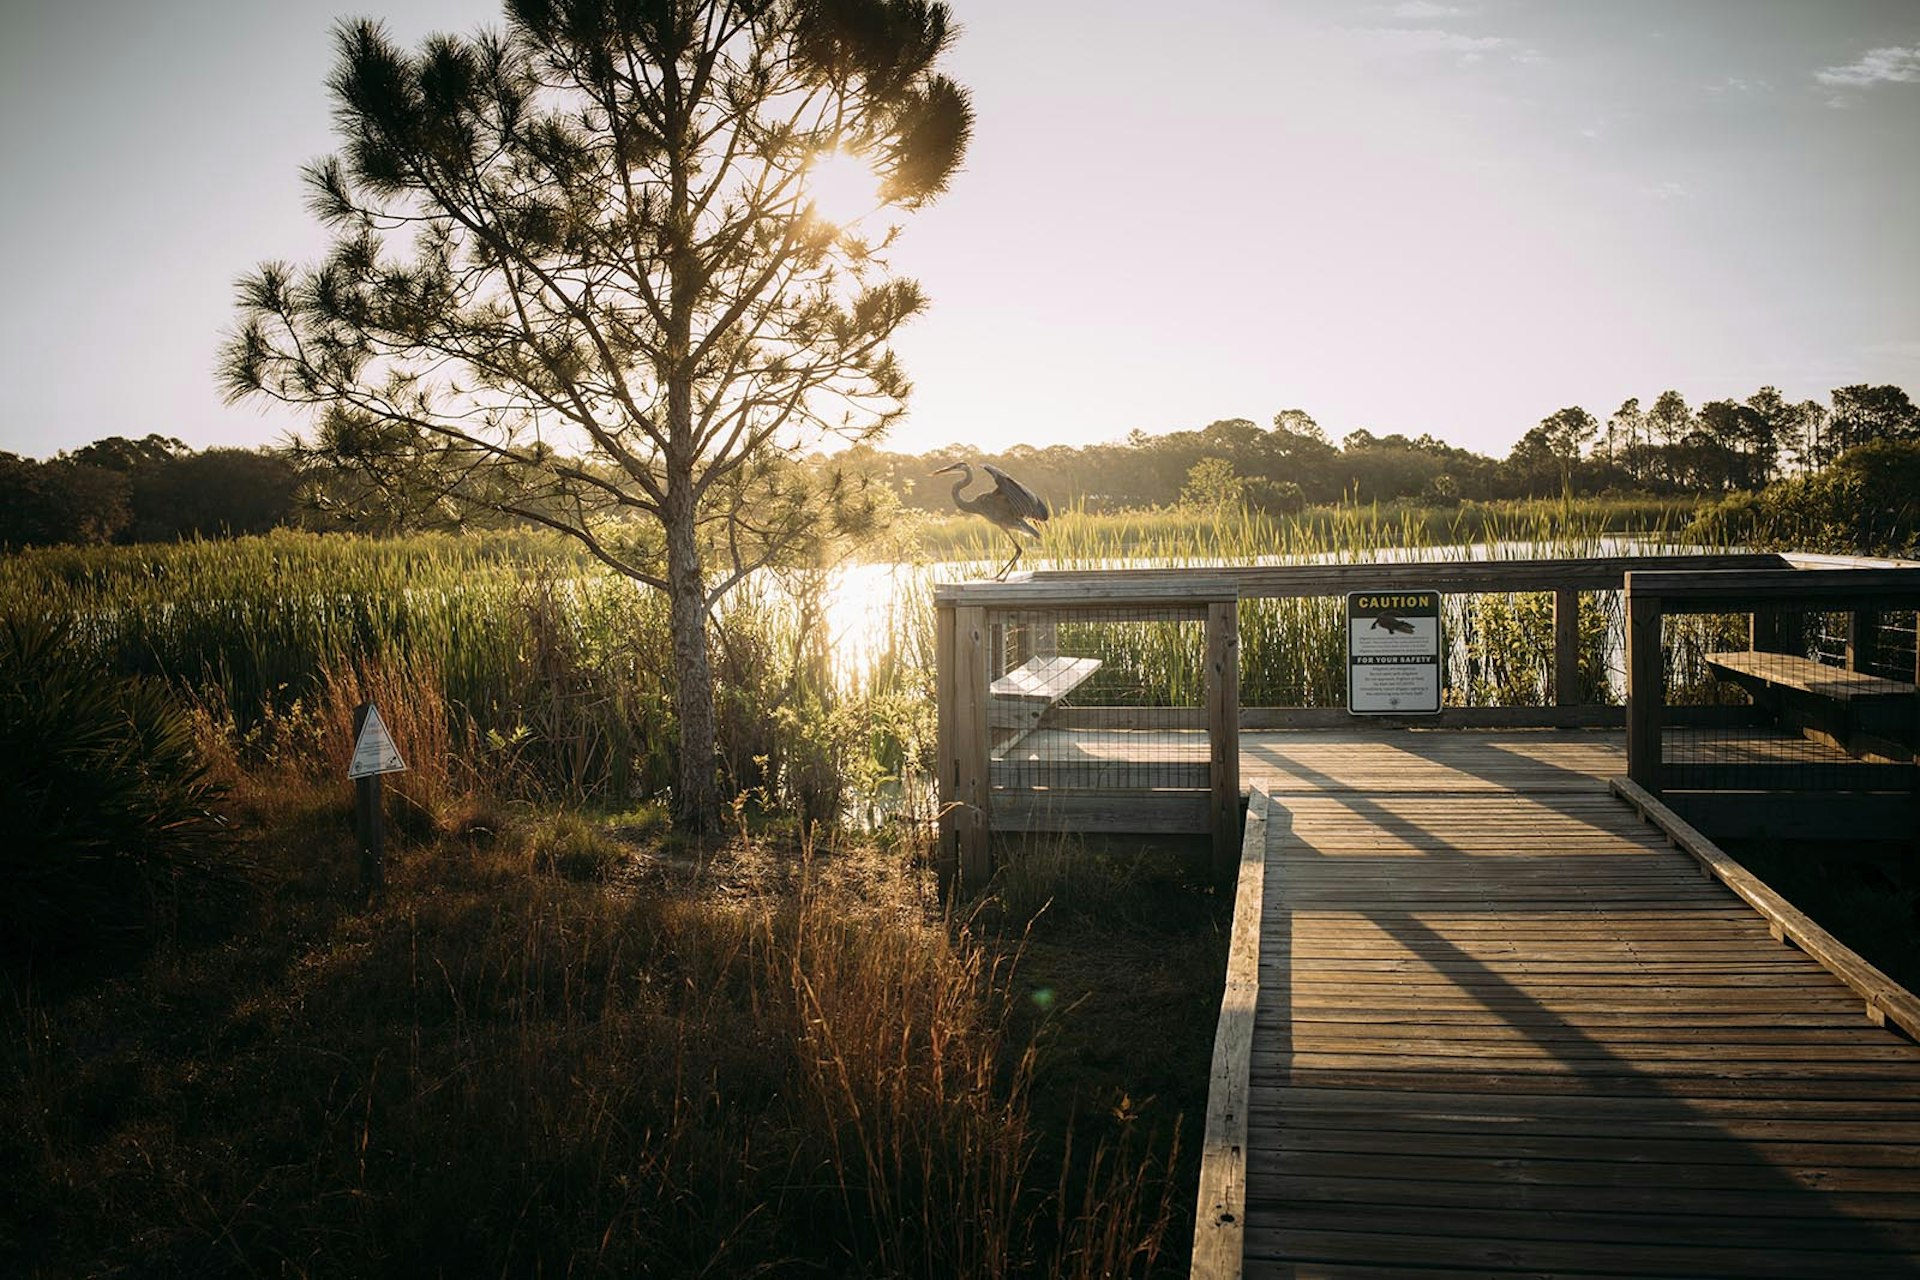 Sunset over wetlands in Conservation Park with egret perched on a wooden boardwalk.